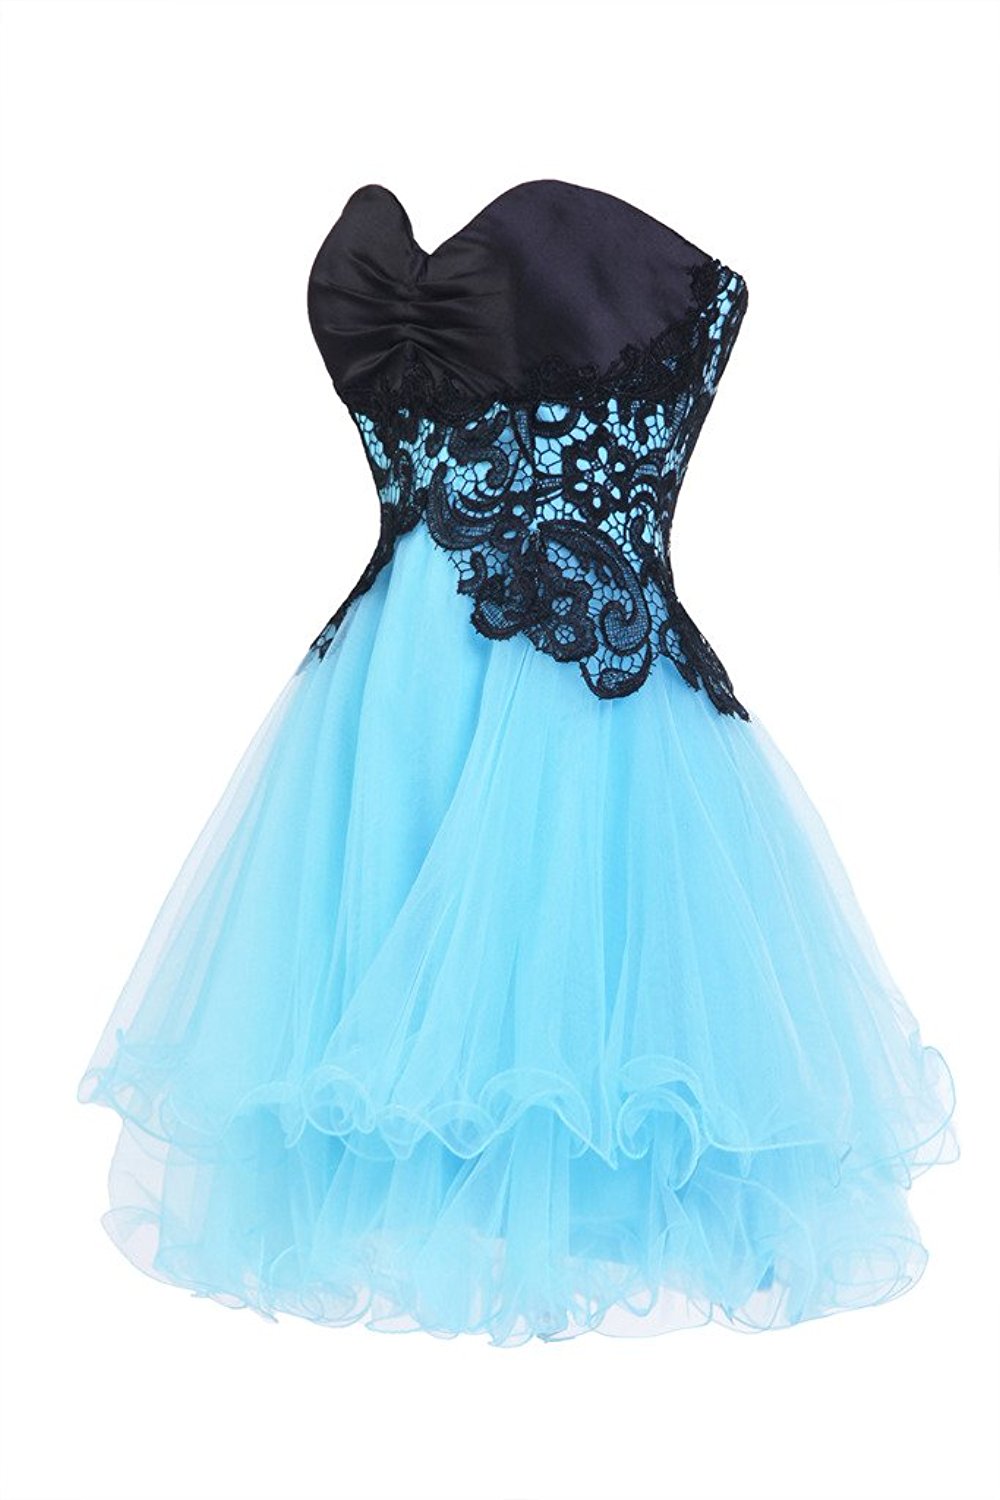 Sweetheart Bridesmaid Short Prom Homecoming Party Dresses For Juniors ...